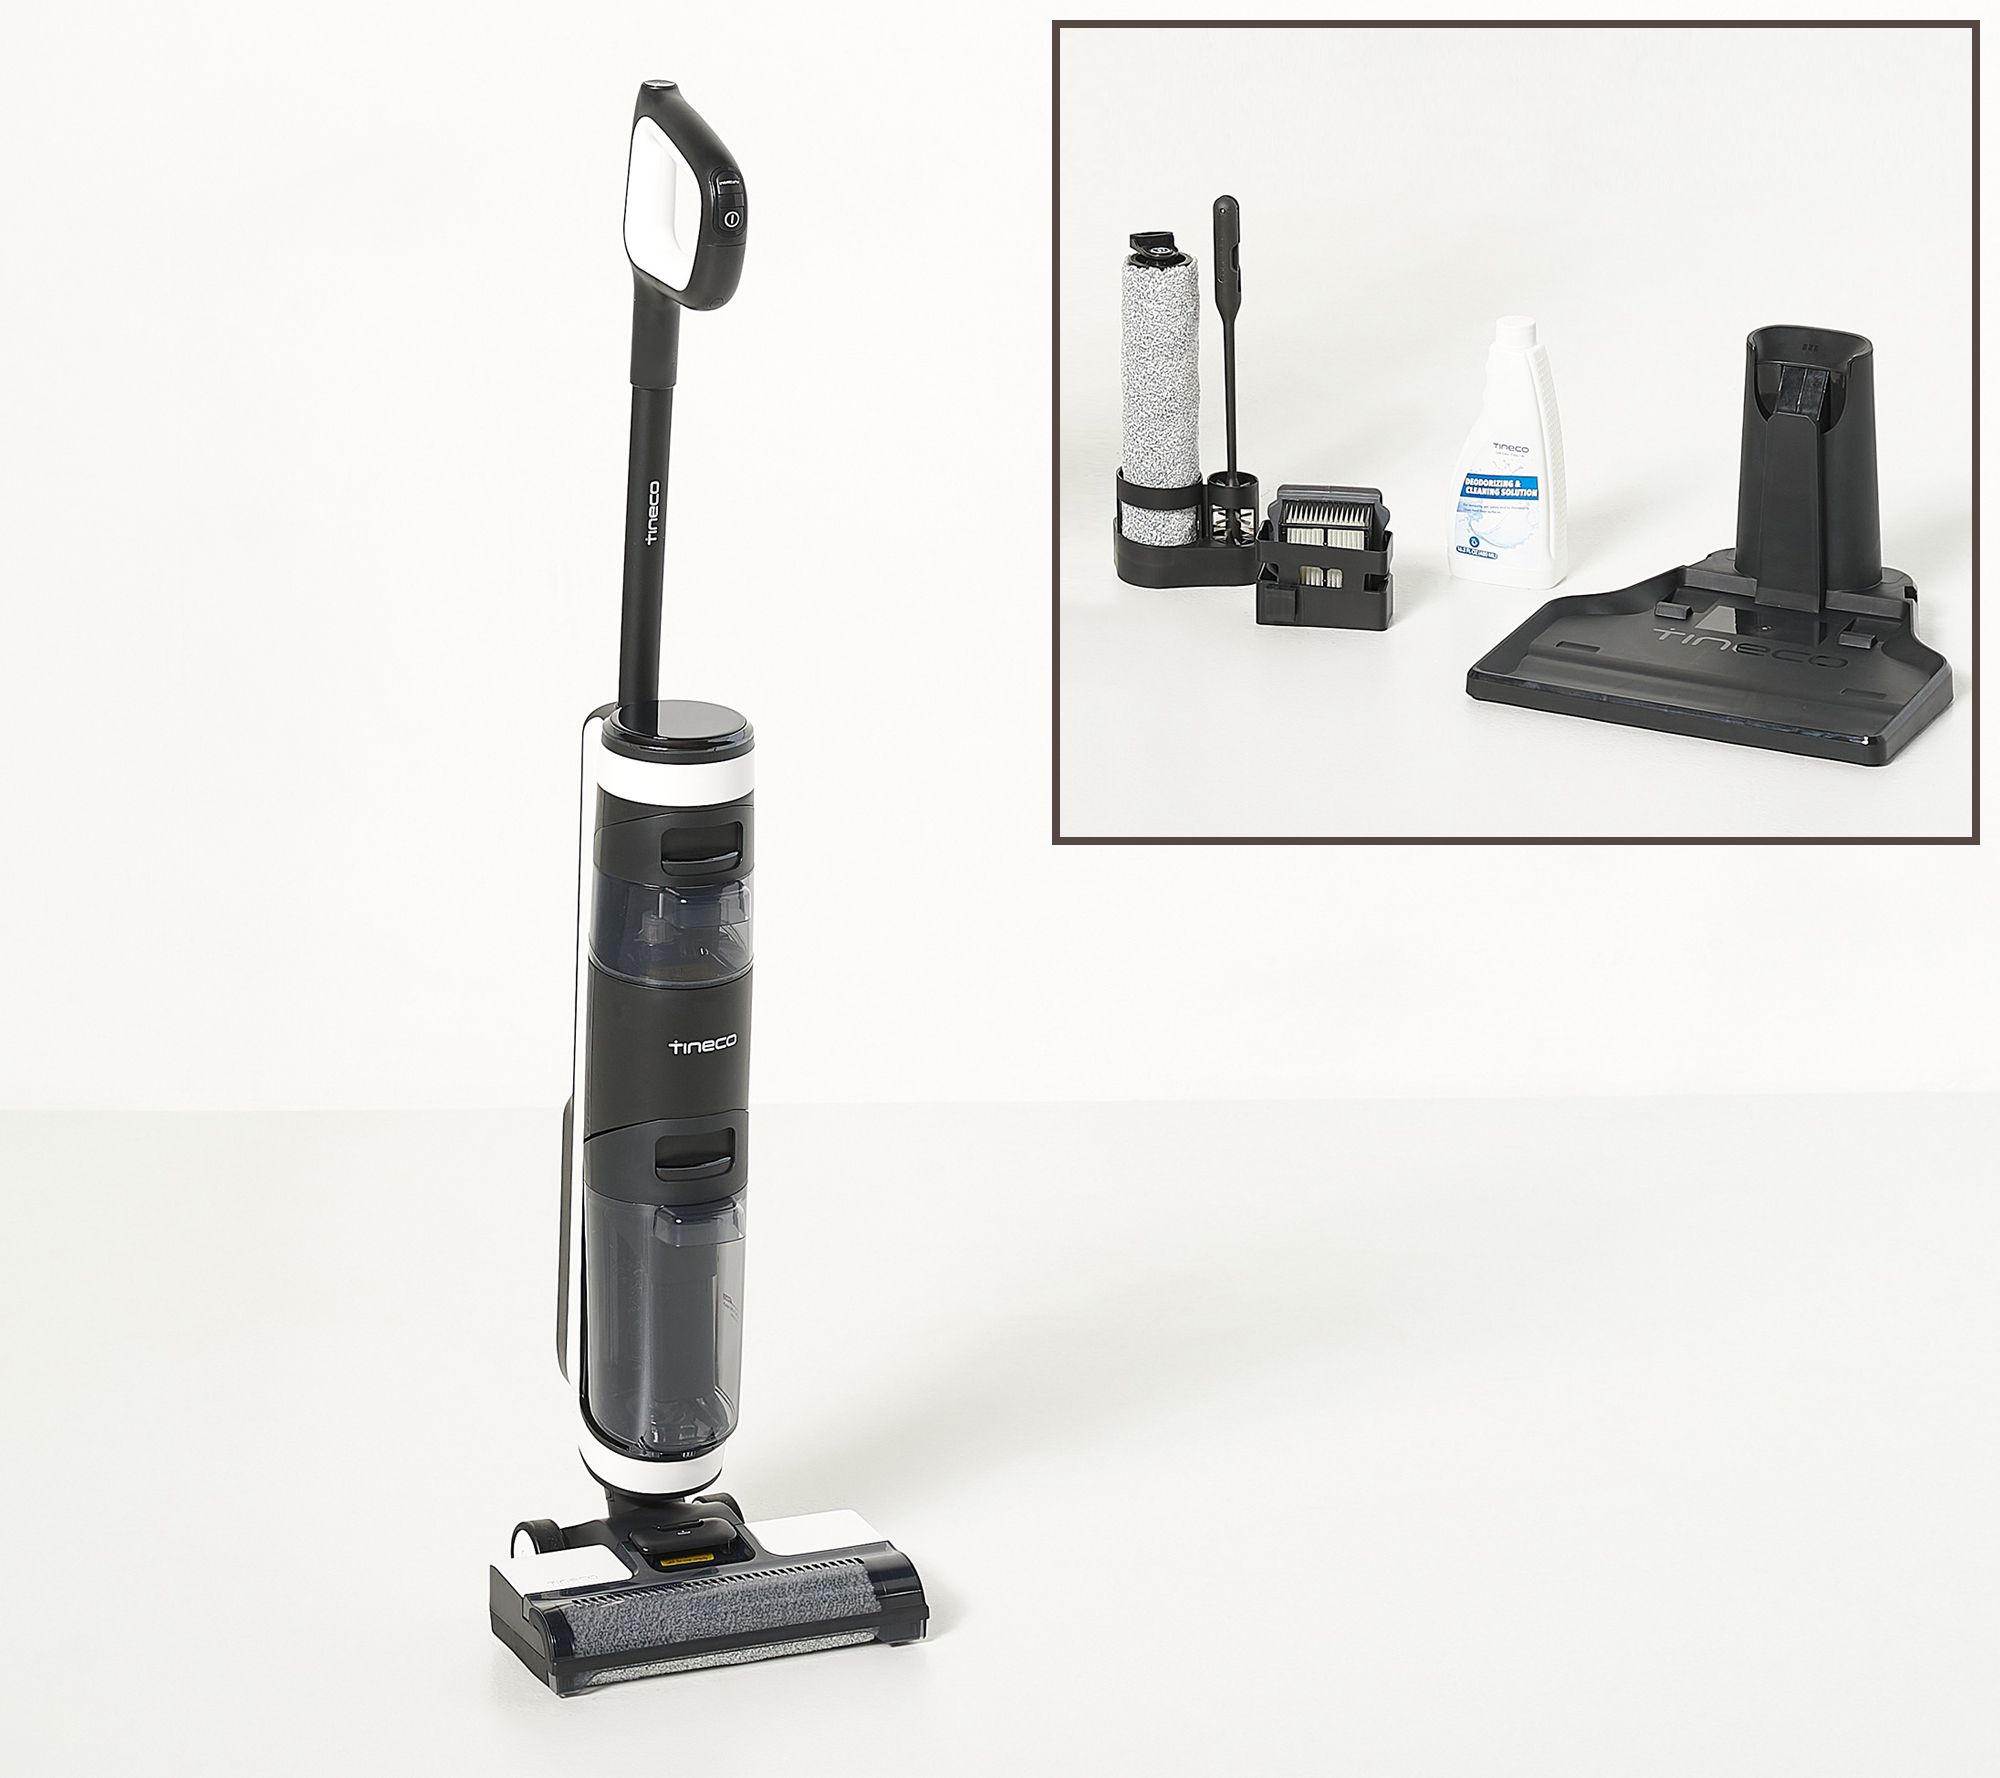 Tineco S3 Pro Floor One Smart Multi-Surface Floor Cleaner w/ Accessories 